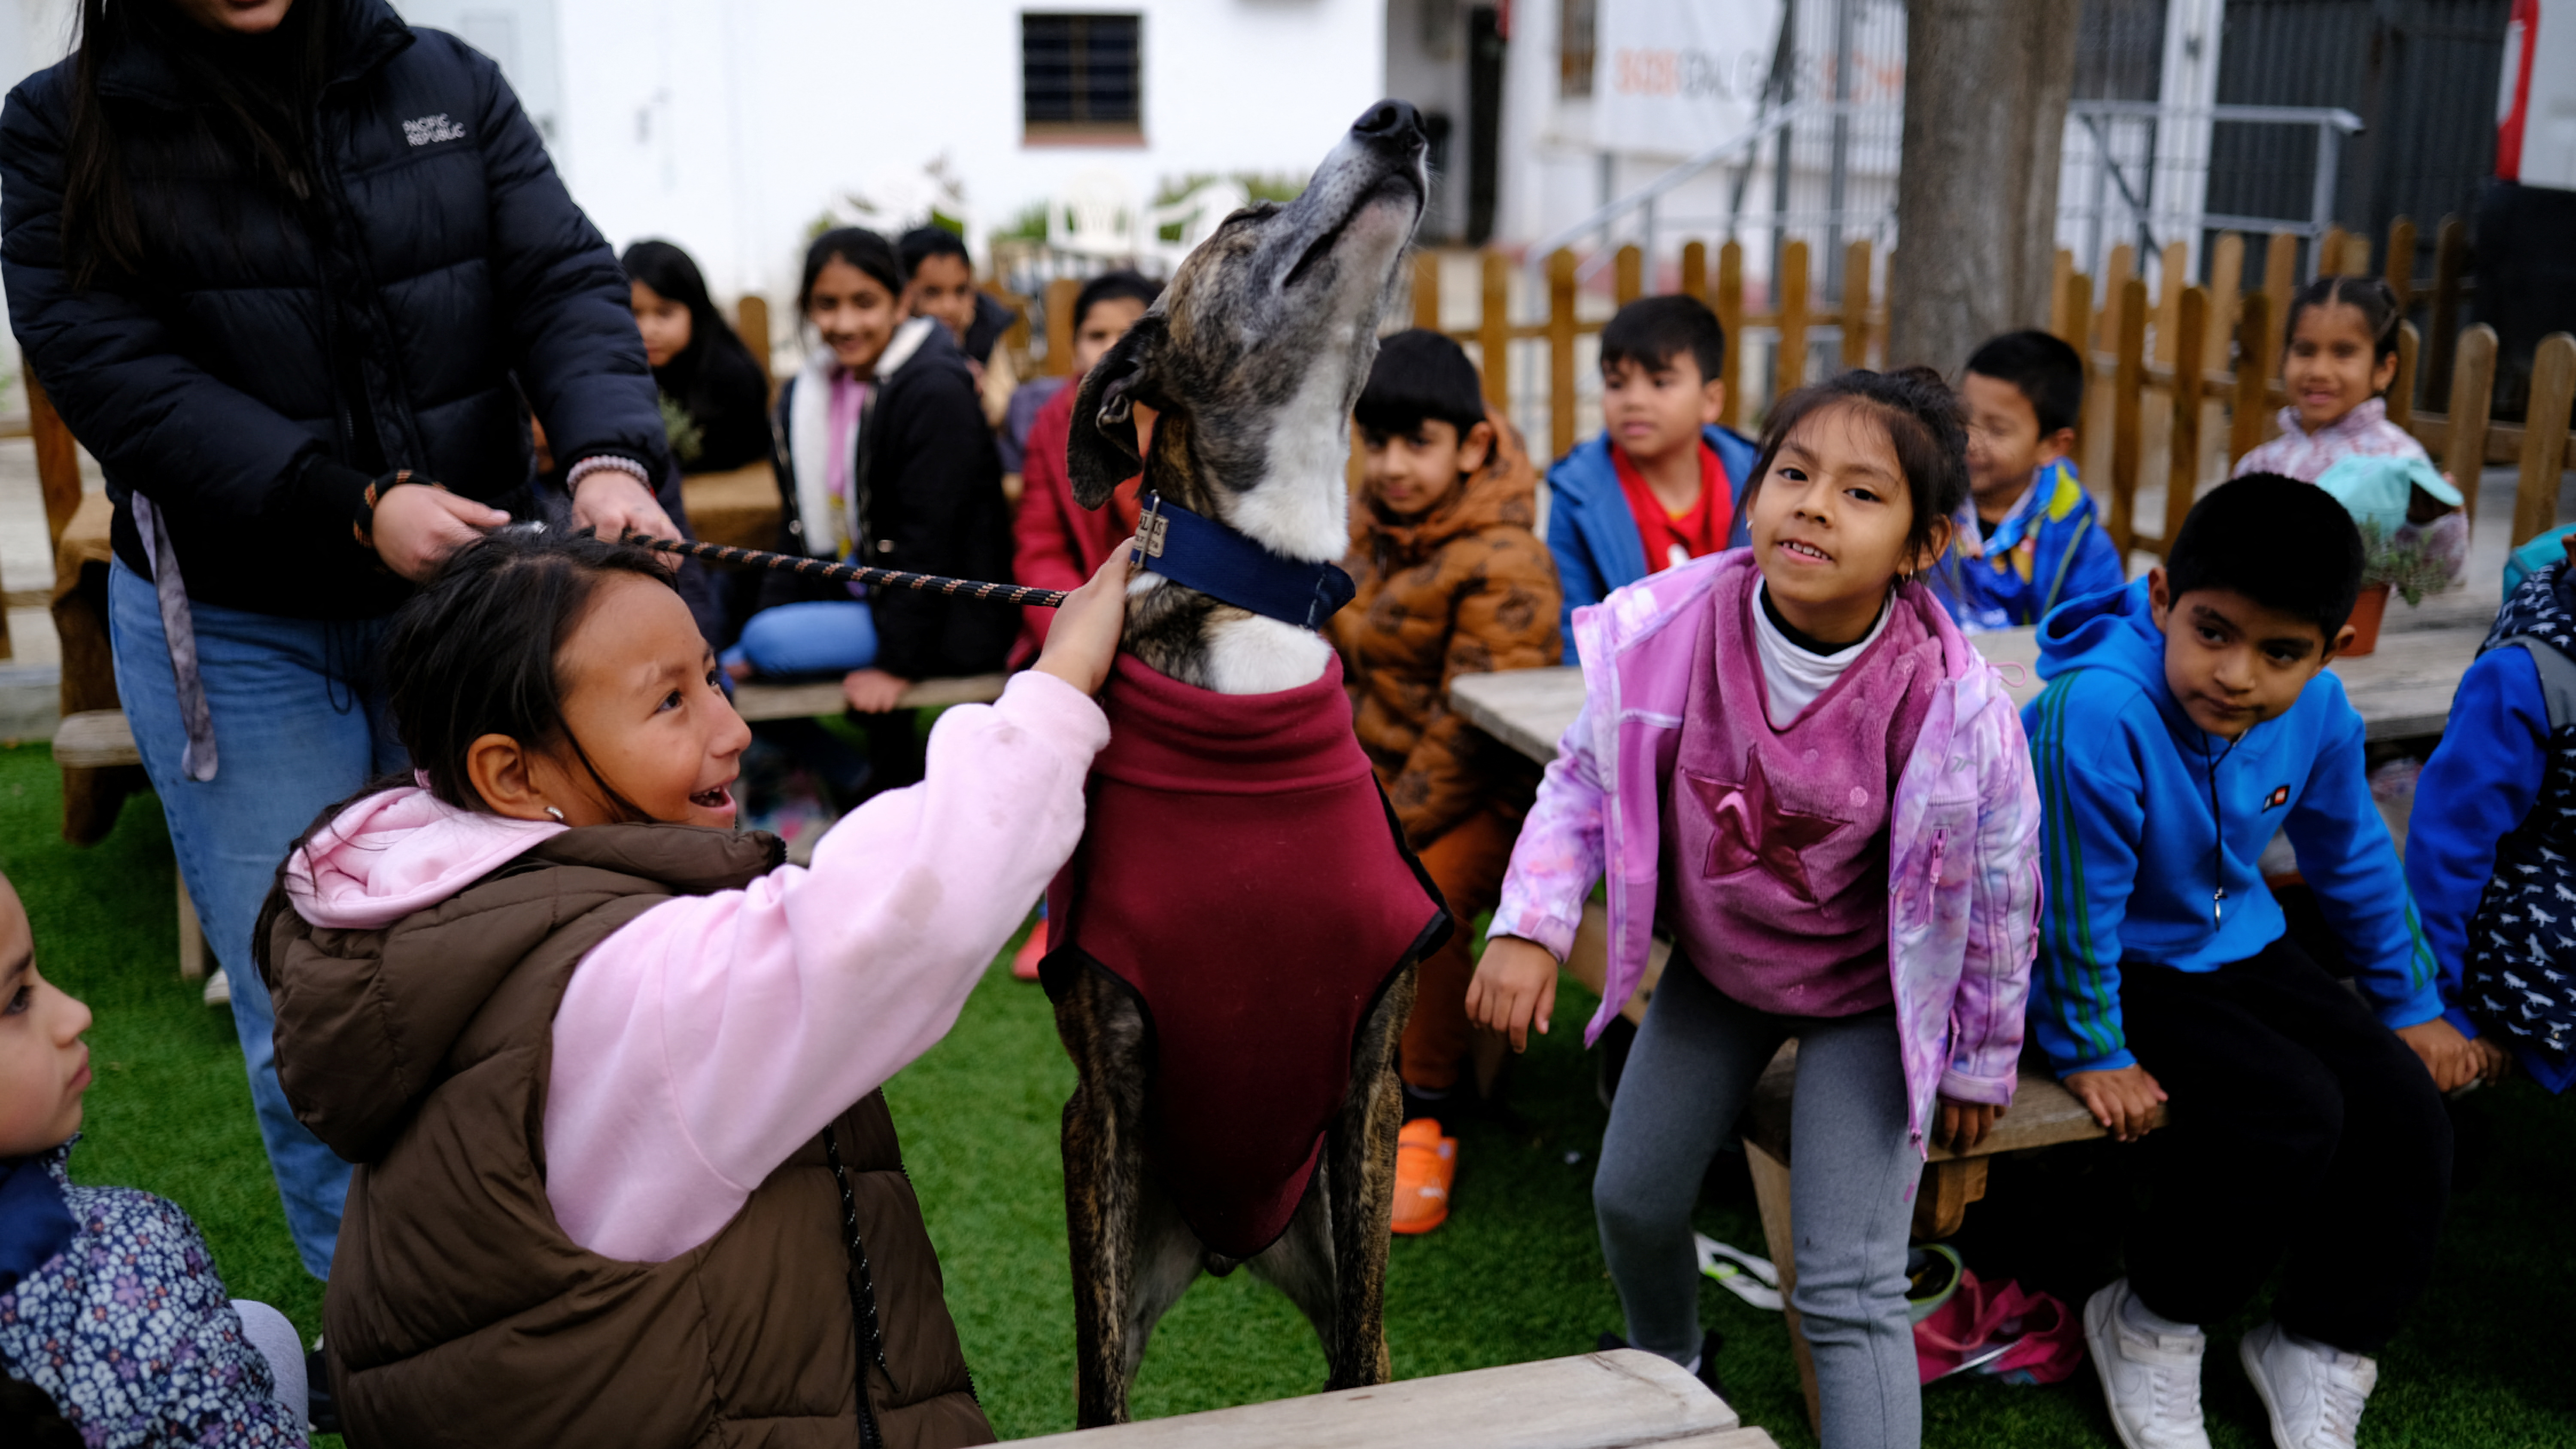 Students of the Joan Maragall school interact with a greyhound during a visit to the SOS Galgos shelter. /Nacho Doce/Reuters